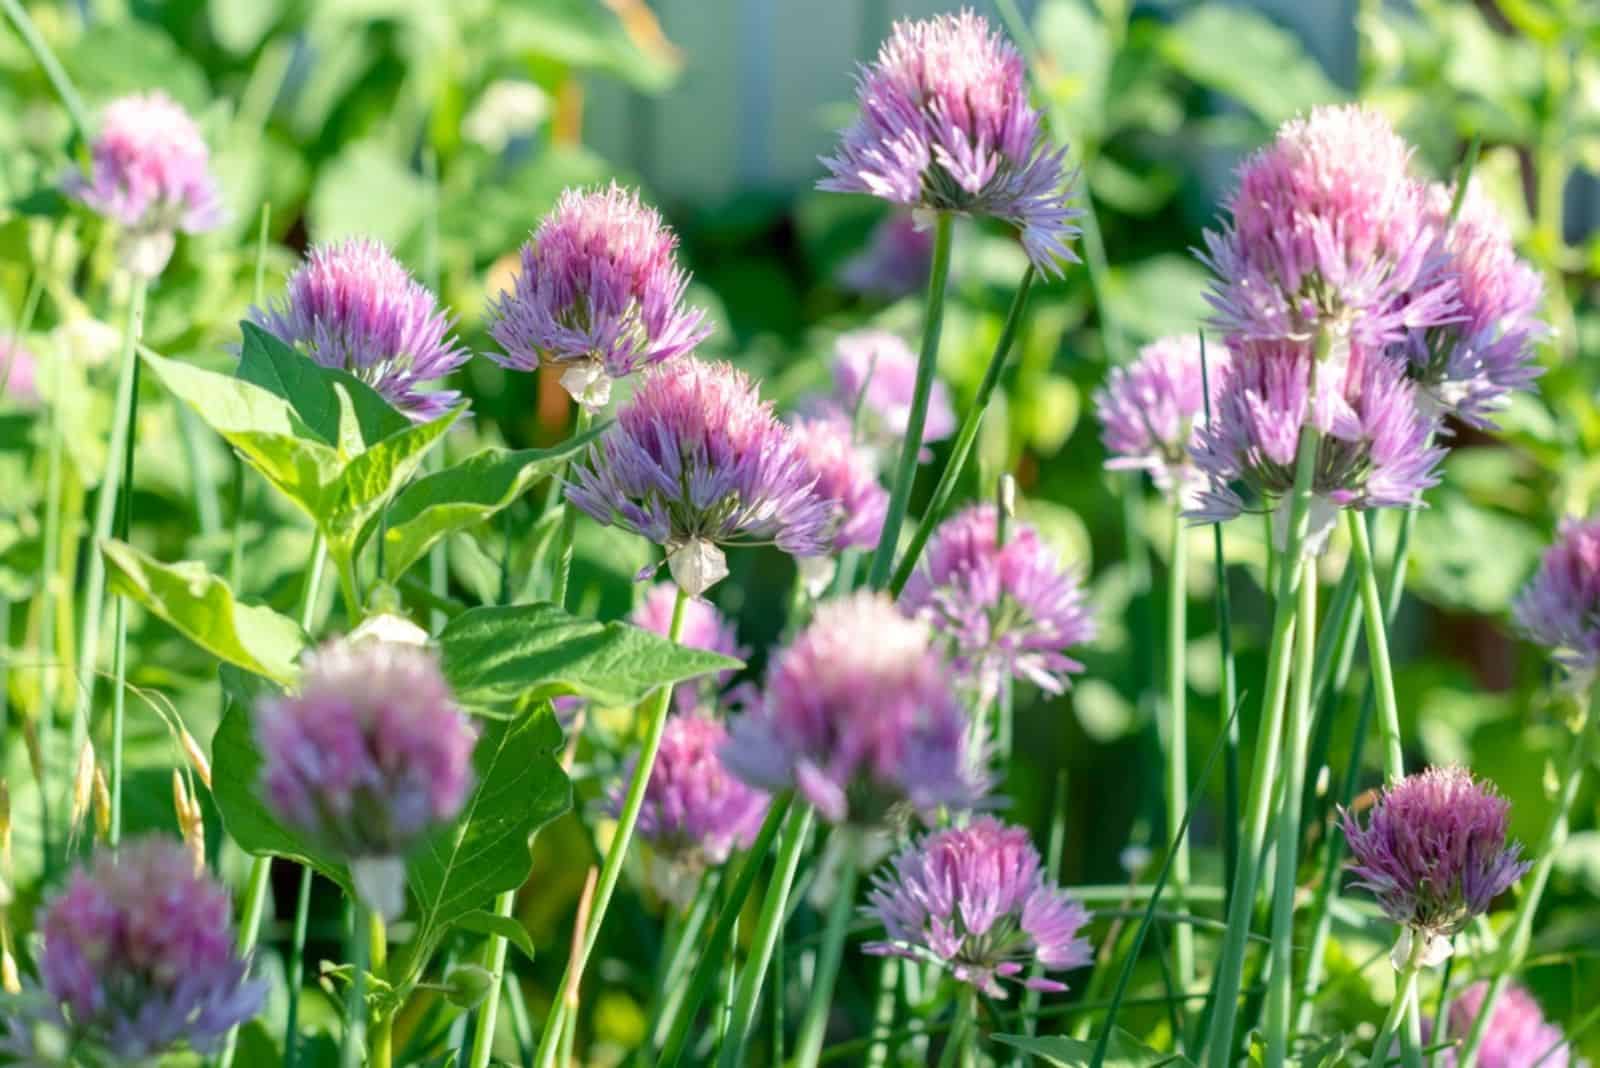 Chives in a garden